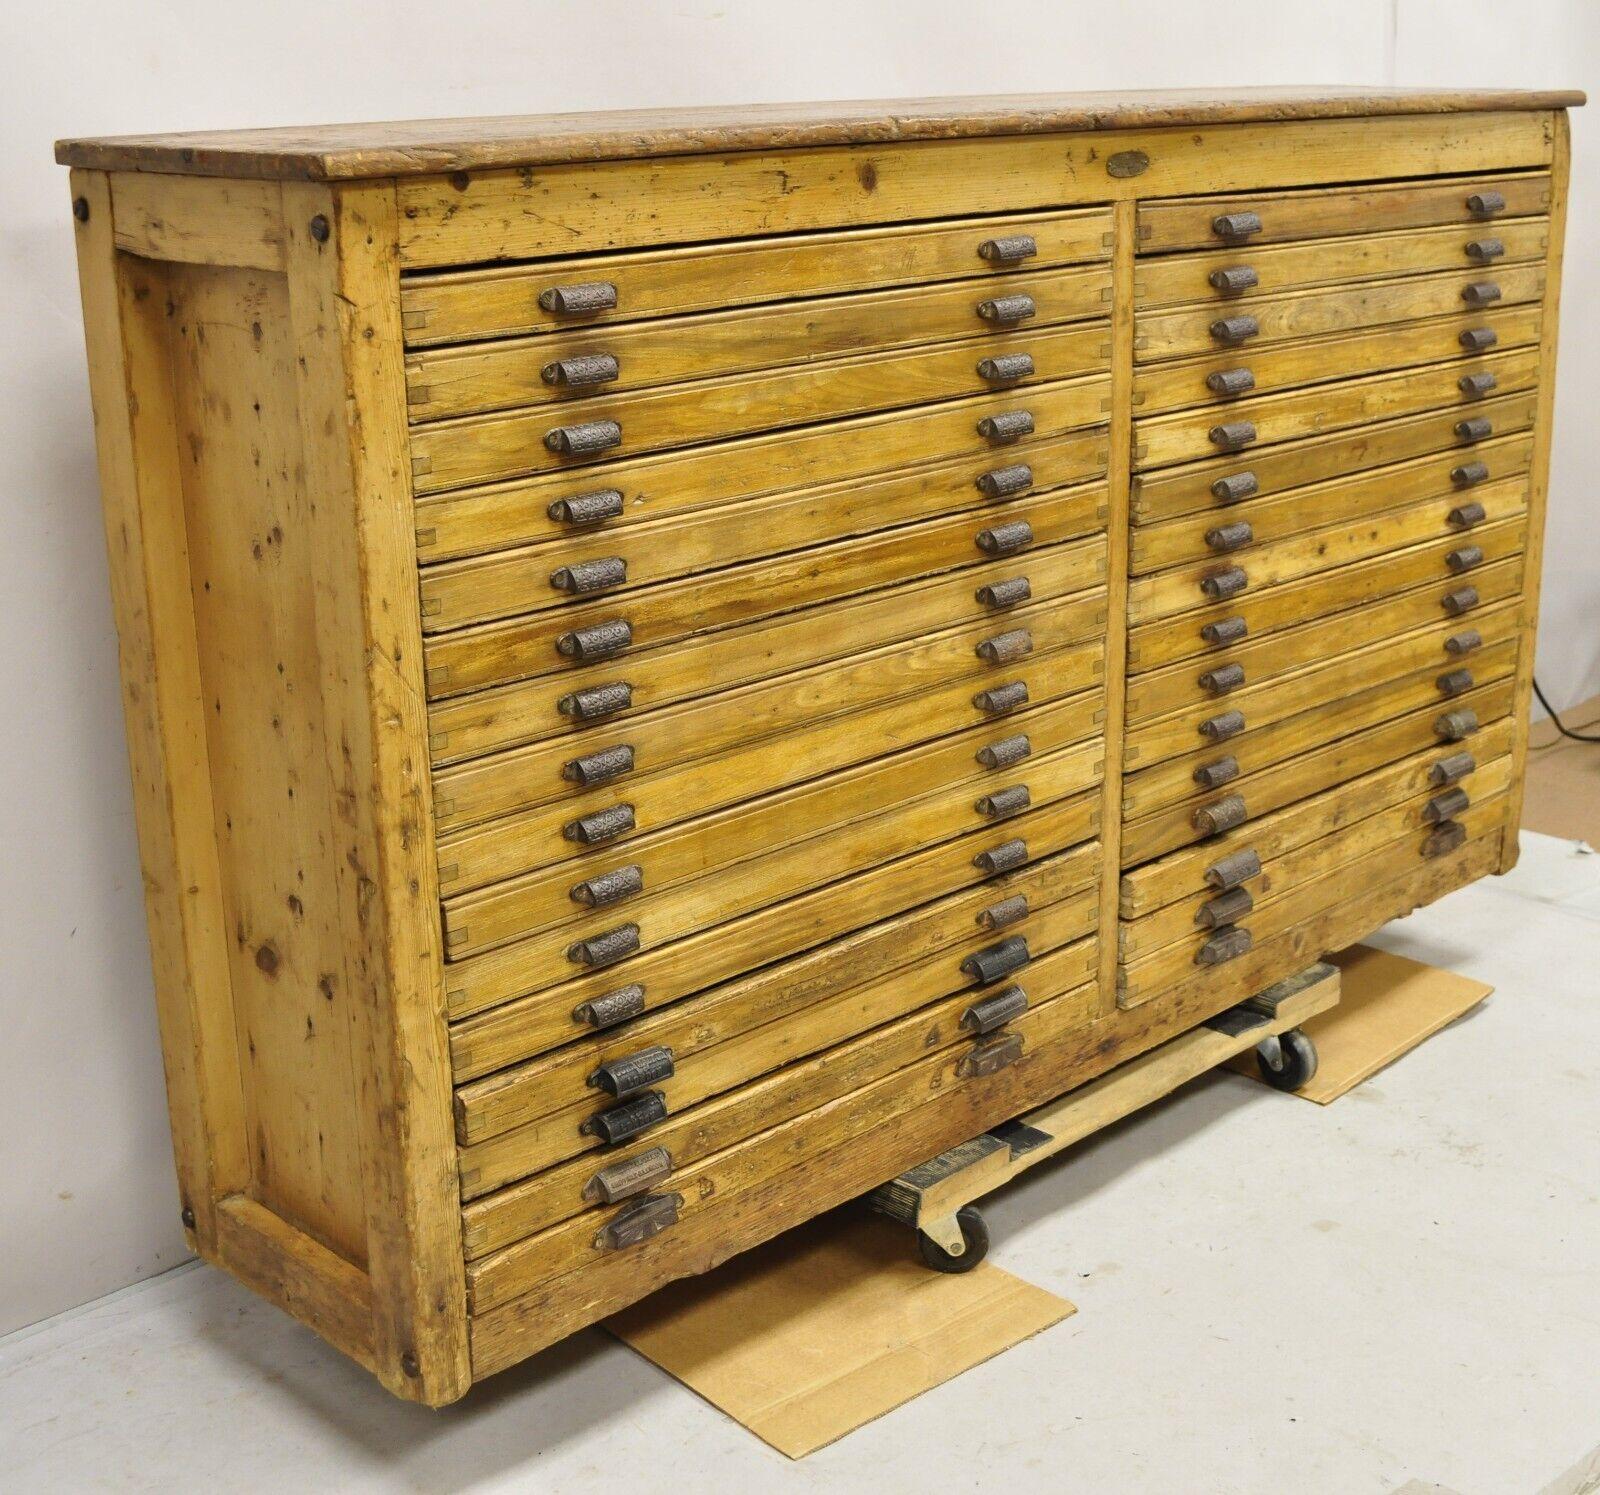 Rare Antique Fred K. Ullmer London Double 32 Drawer Map Makers Flat File Printers Cabinet. Item features 32 drawers with various partitions (some with separators some without), planked wood back, cast iron hardware, original branding, believed to be